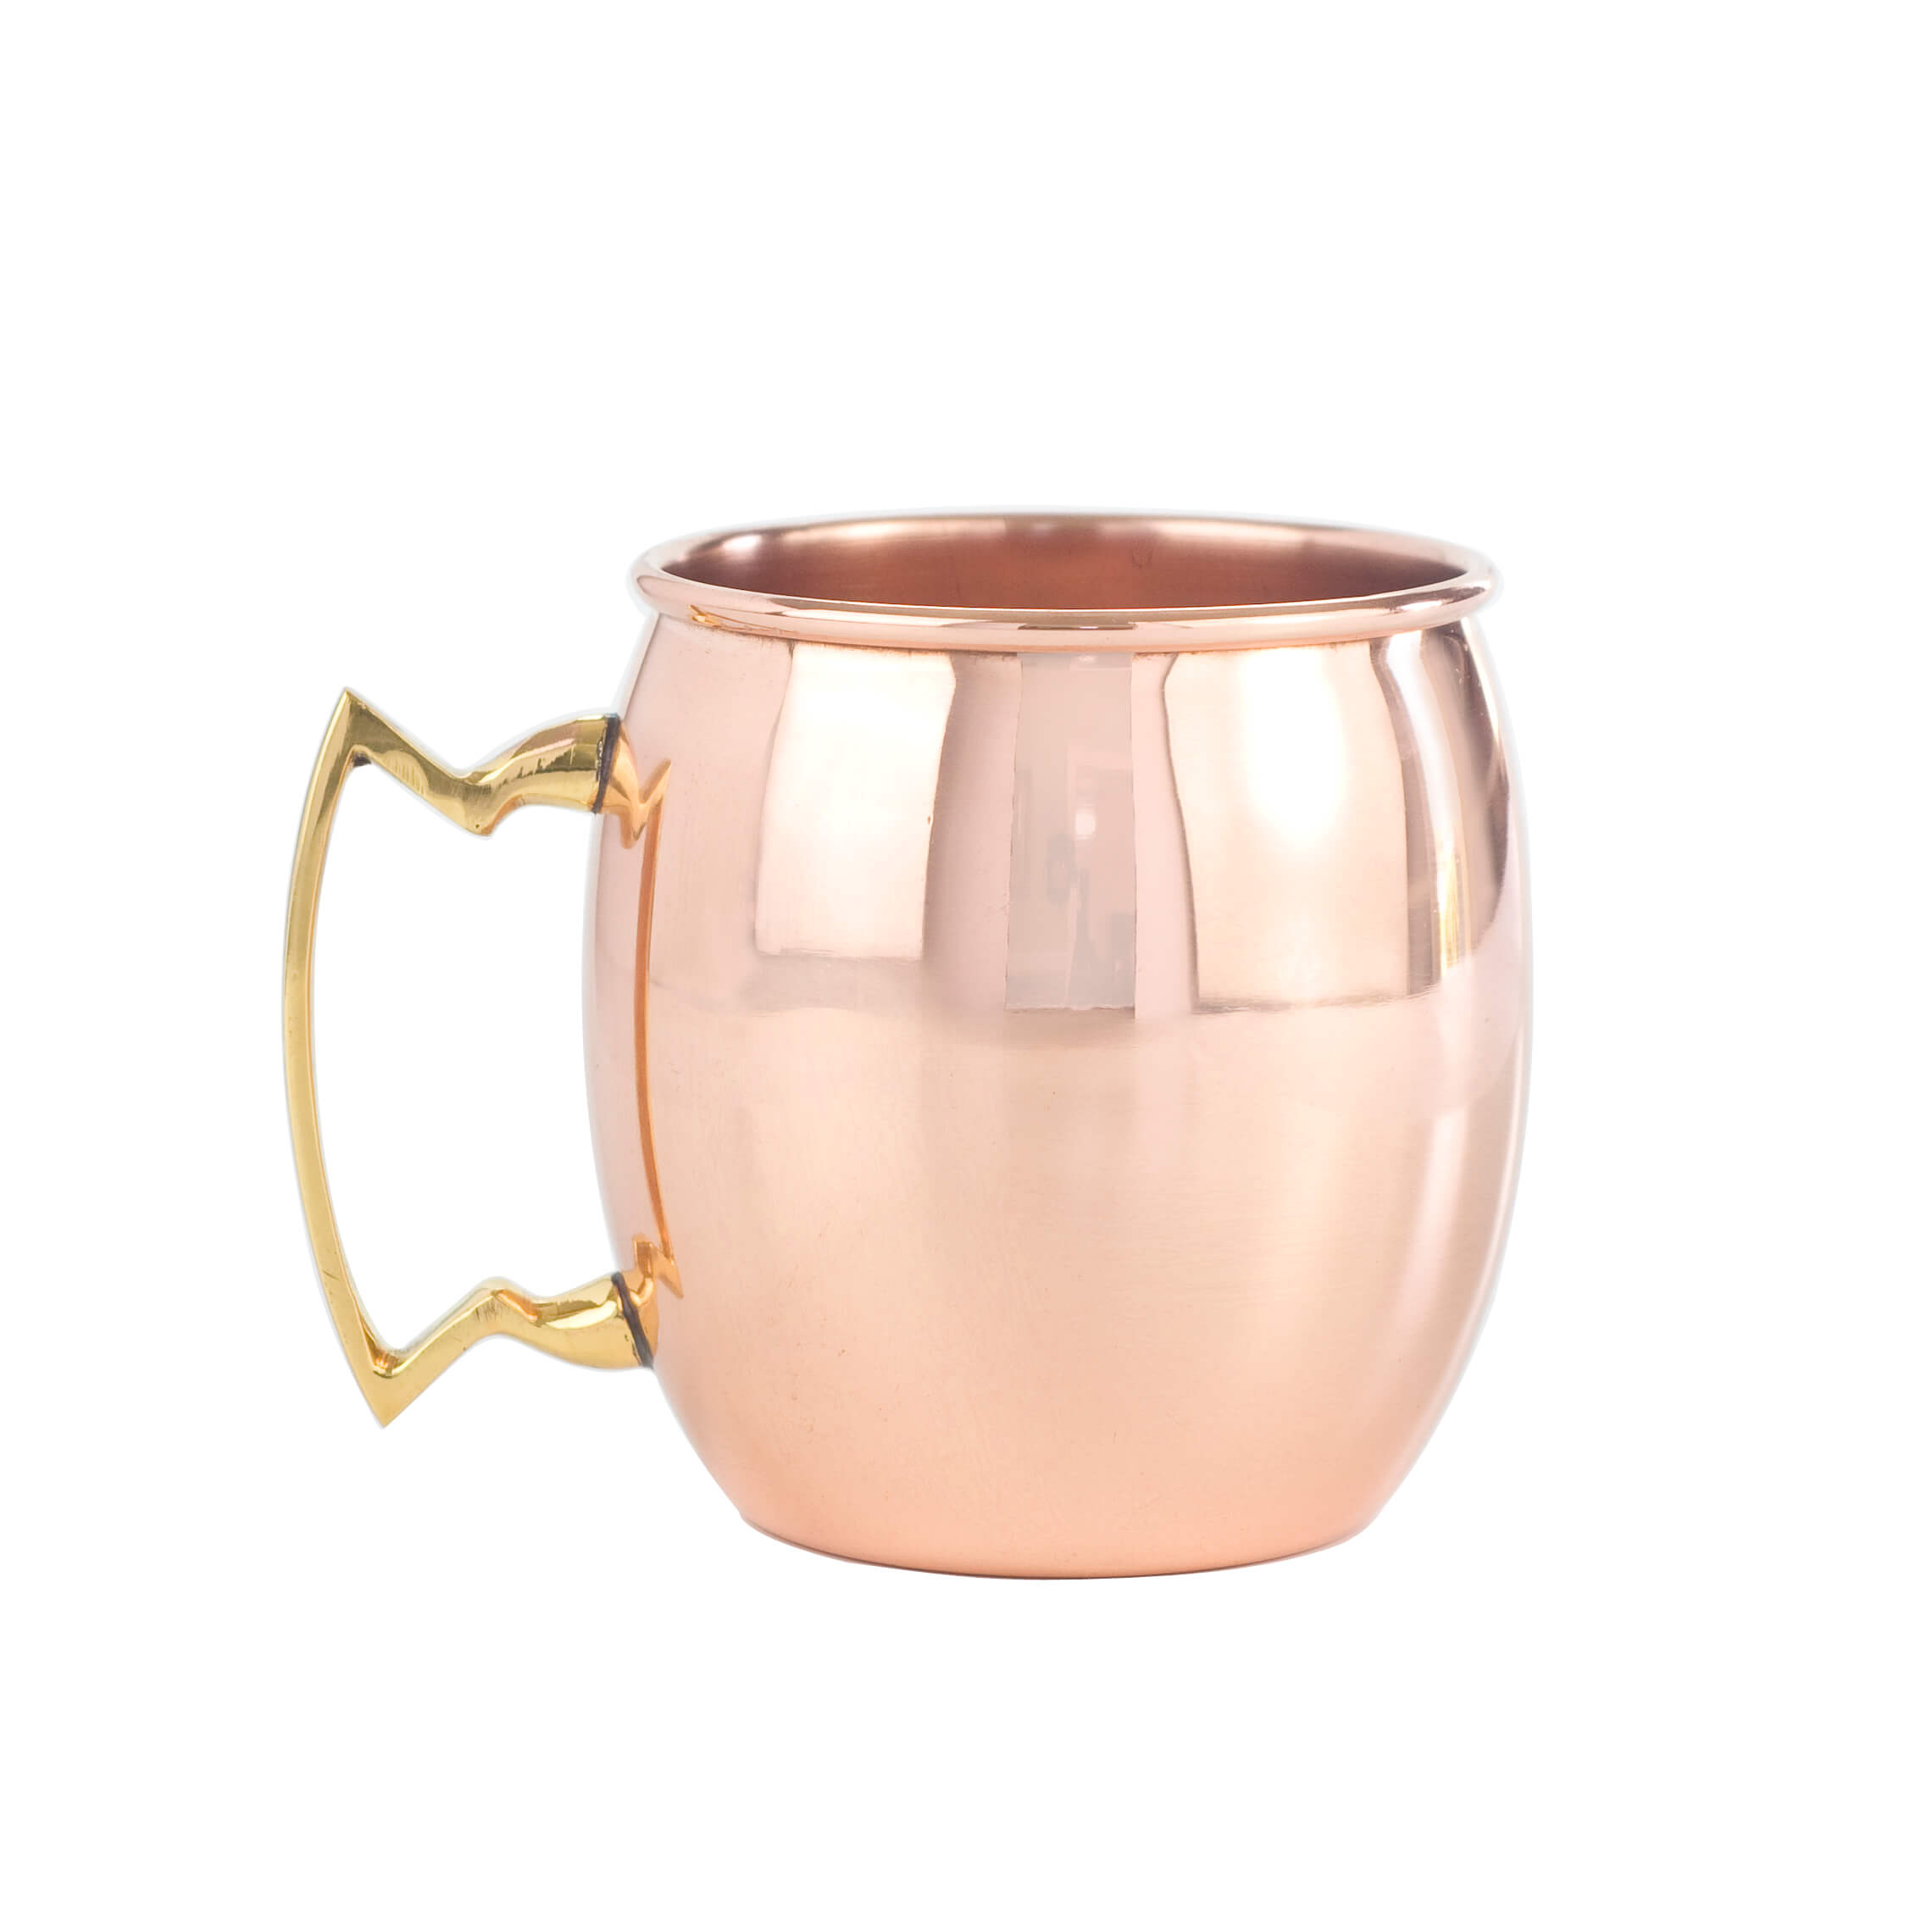 Original Smooth: 16oz Copper Moscow Mule Mug with Brass Handle by Copper  Mug Co.